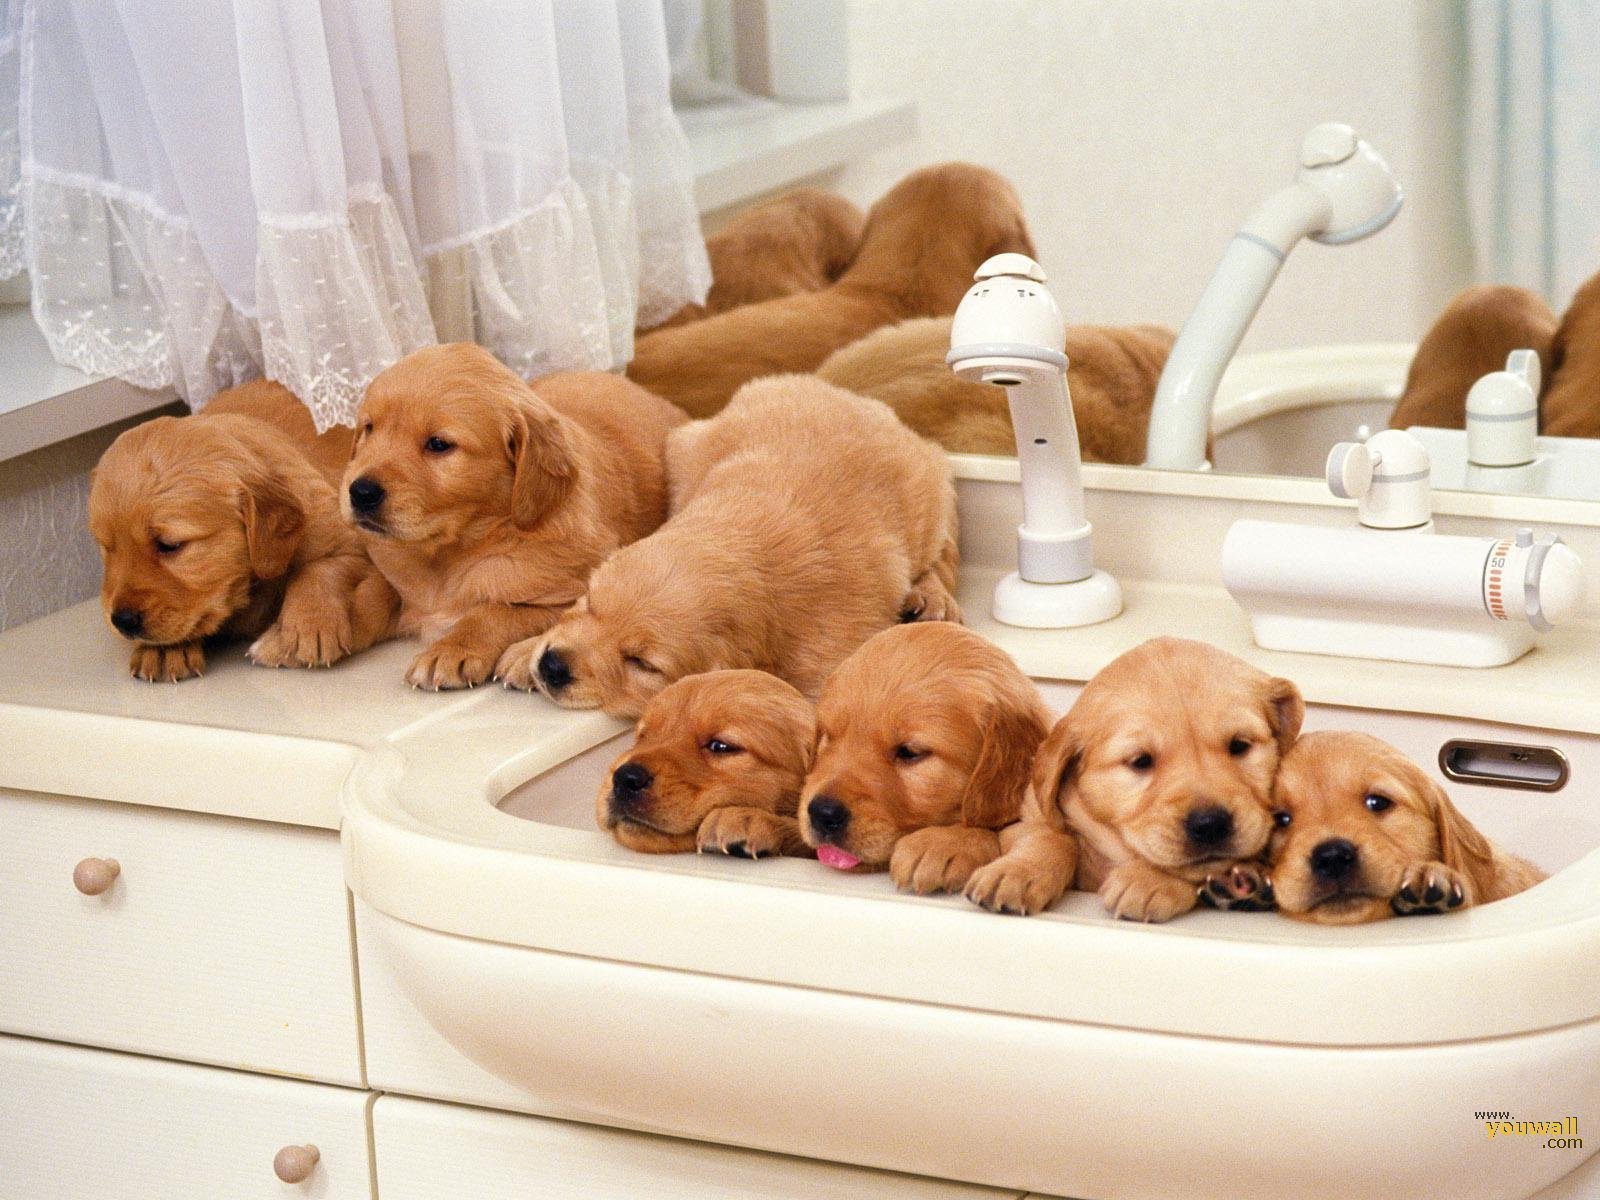 Cute-Puppies-puppies-13632075-1600-1200.